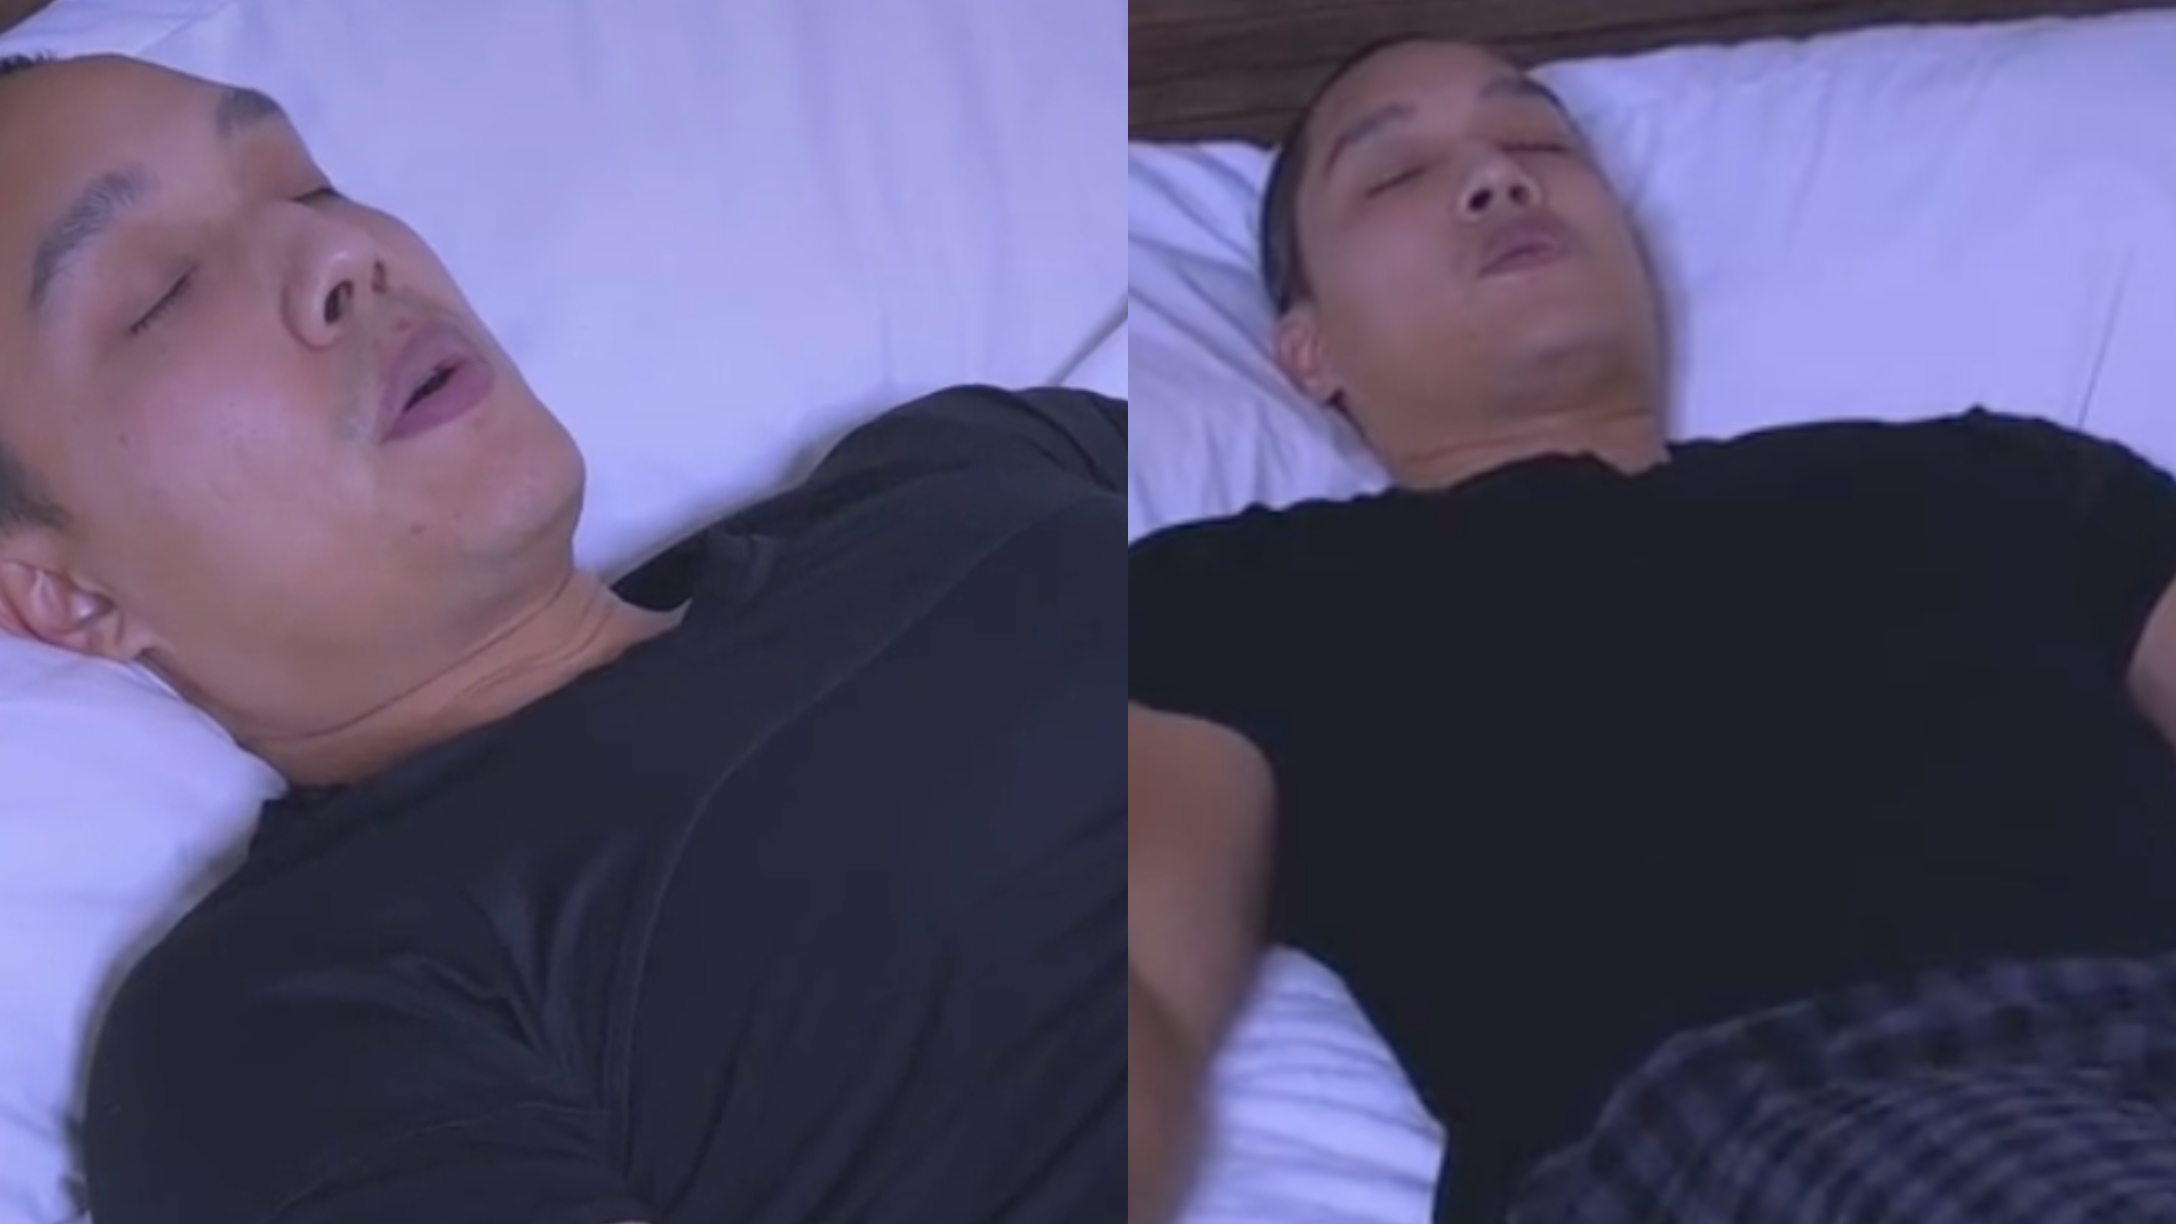 Insomniacs Swear By This TikTok 'Hack', Which Can Put You to Sleep in Just 2 Minutes